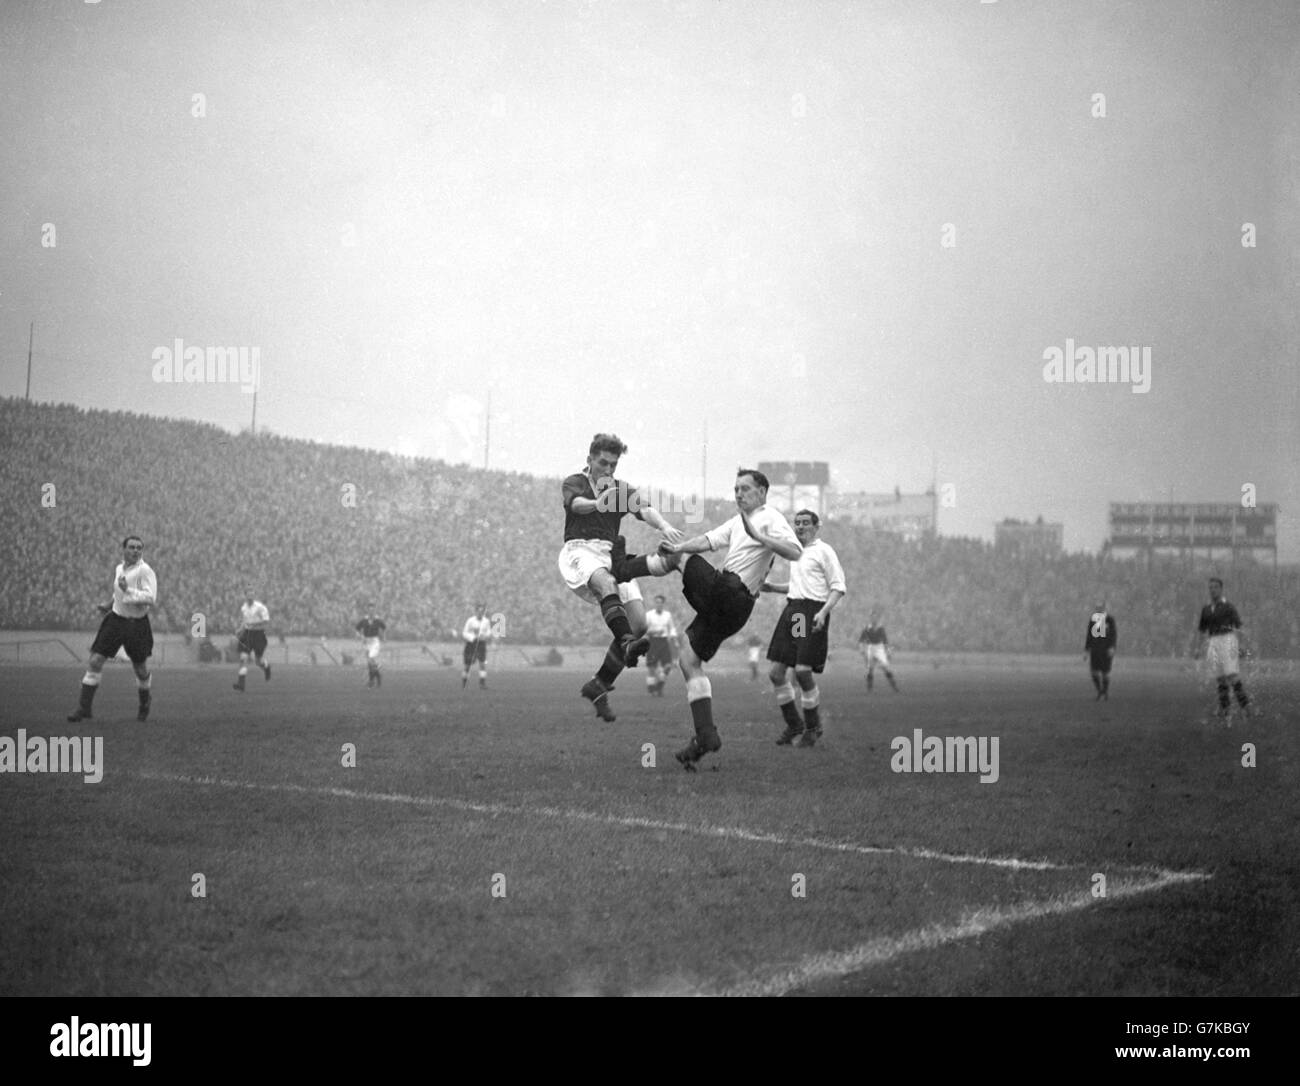 Soccer - League Division One - Chelsea v Everton - Stamford Bridge. Chelsea's Roy Bentley (l) battles for the ball with Everton's George Saunders (r). Stock Photo